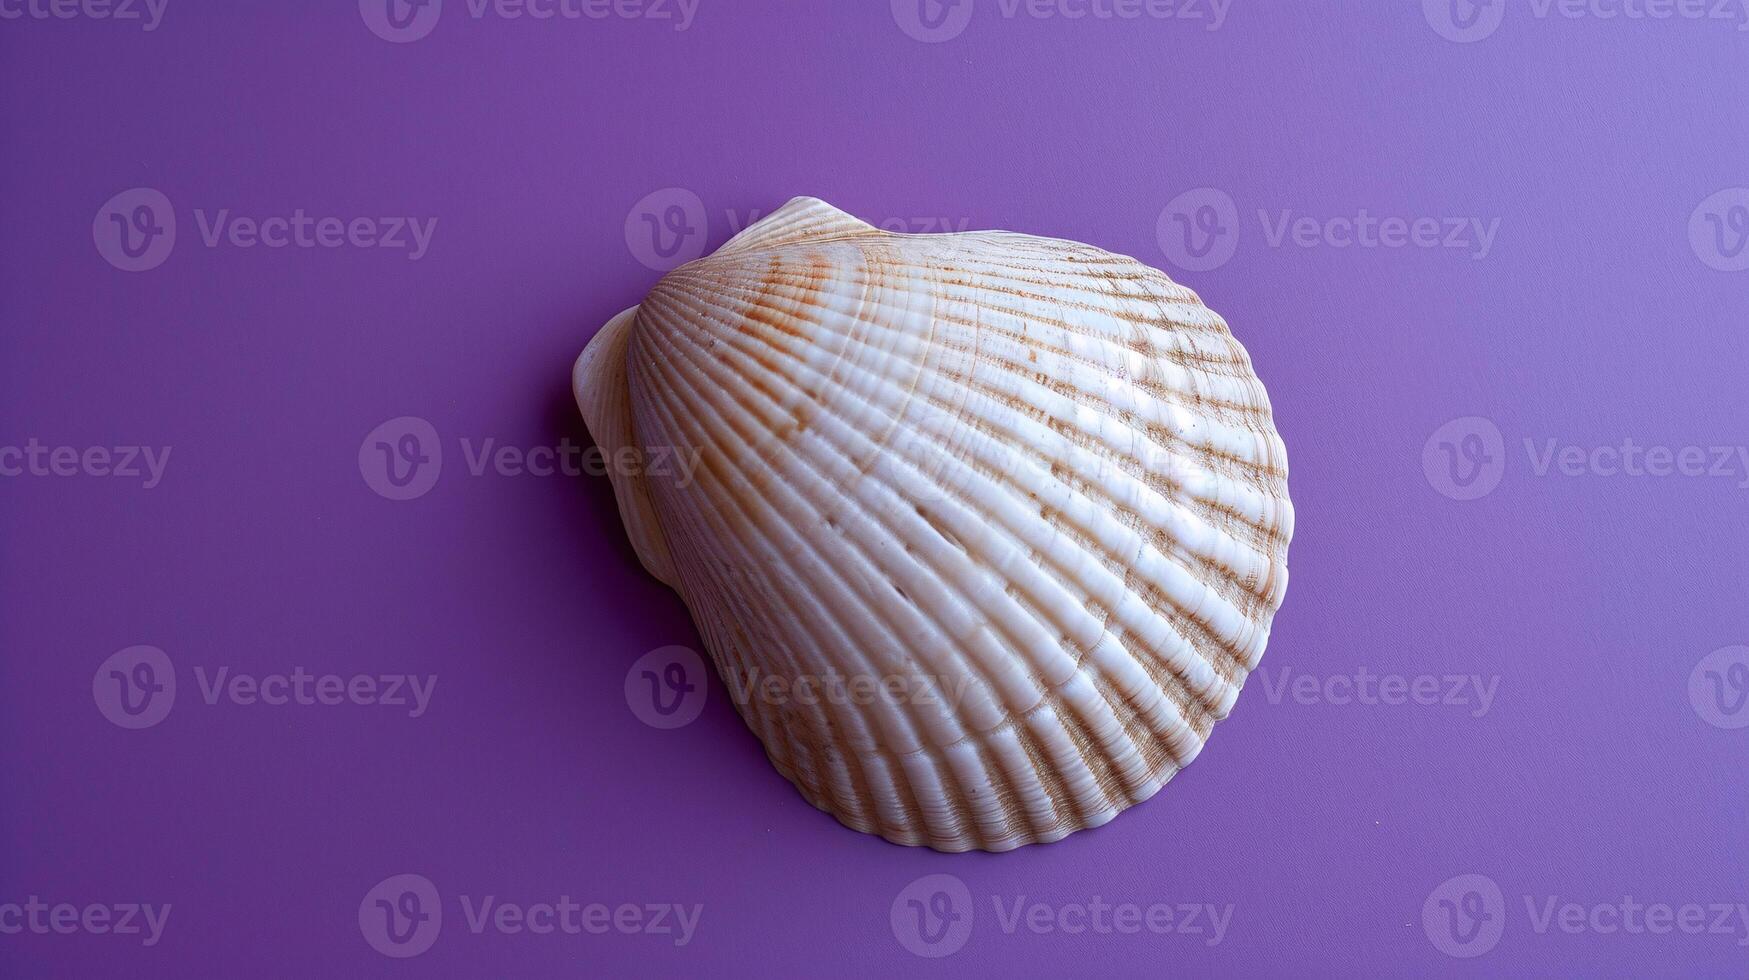 A single seashell, delicately placed against a colored background, captures the essence of the ocean photo